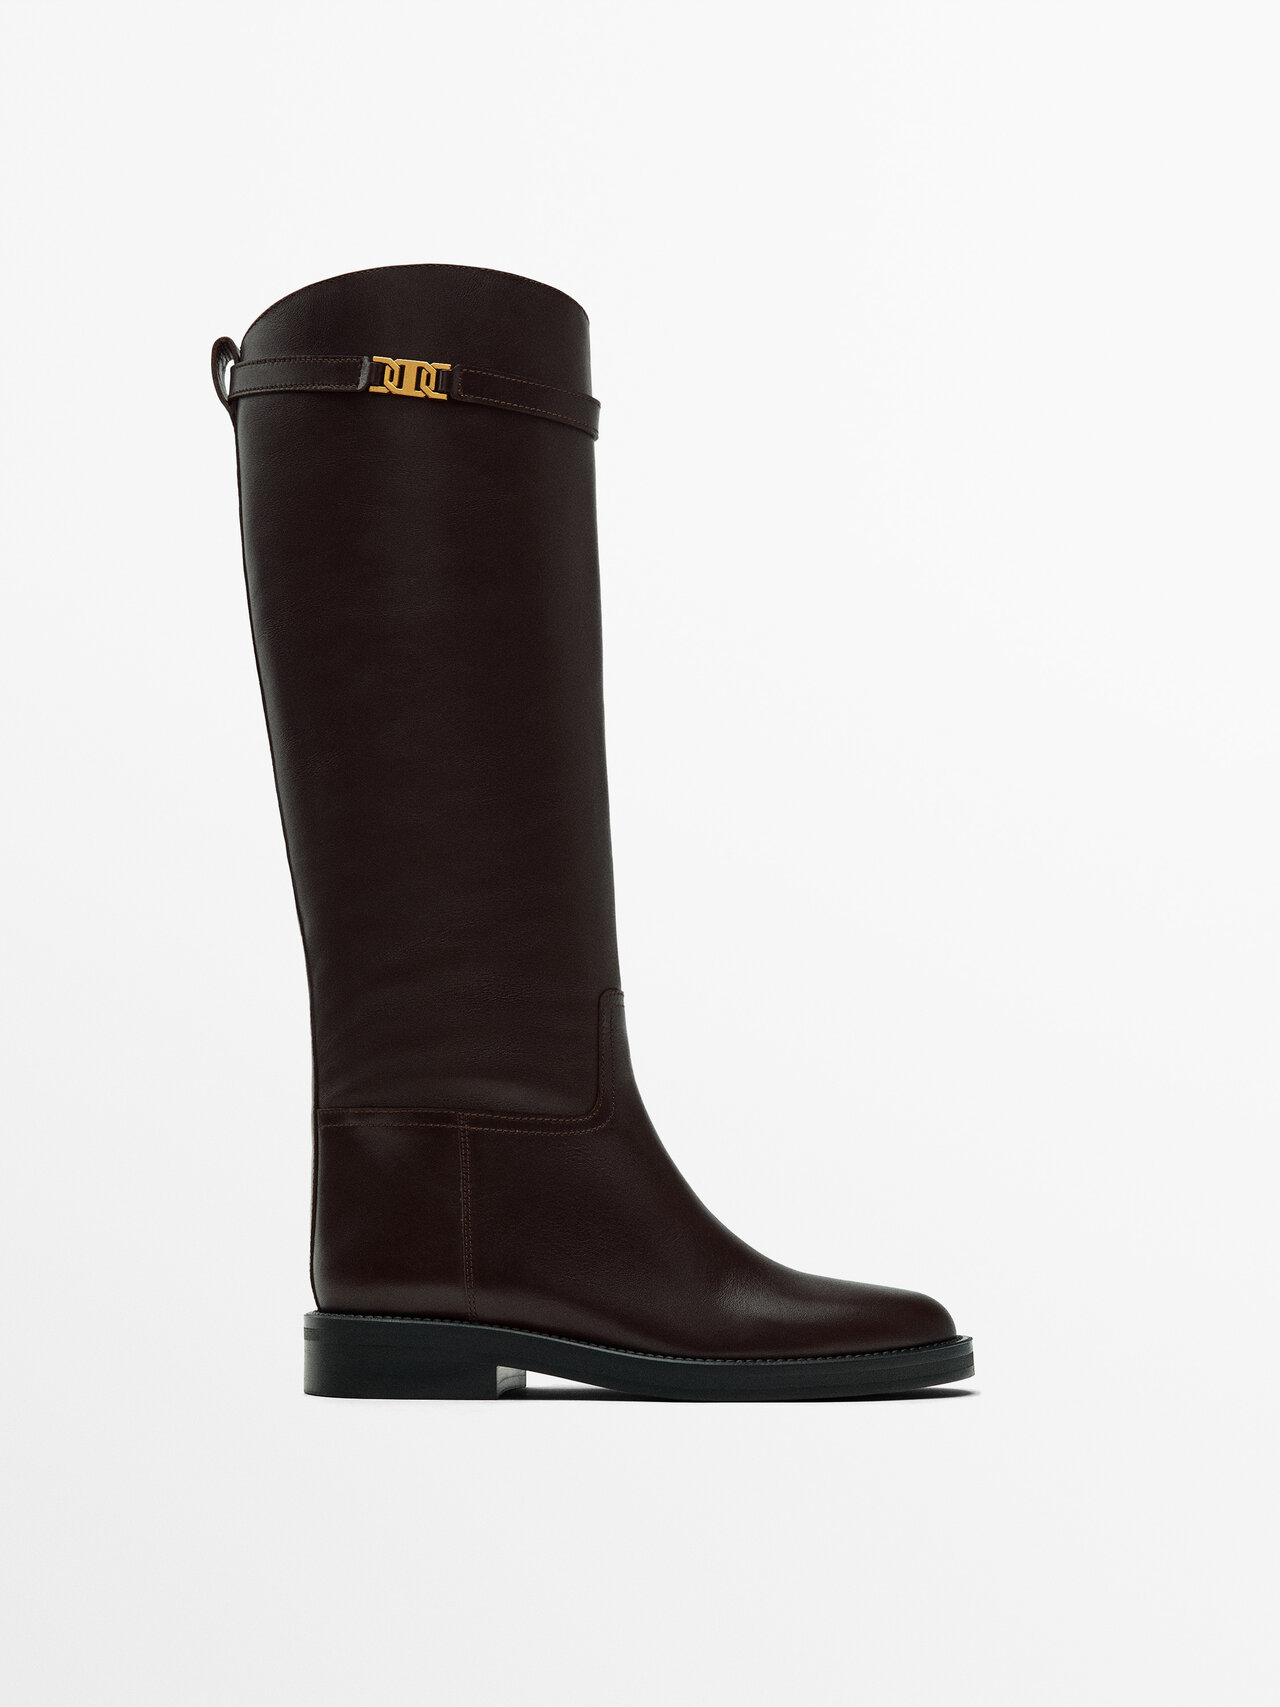 Massimo Dutti Riding-style Boots In Brown